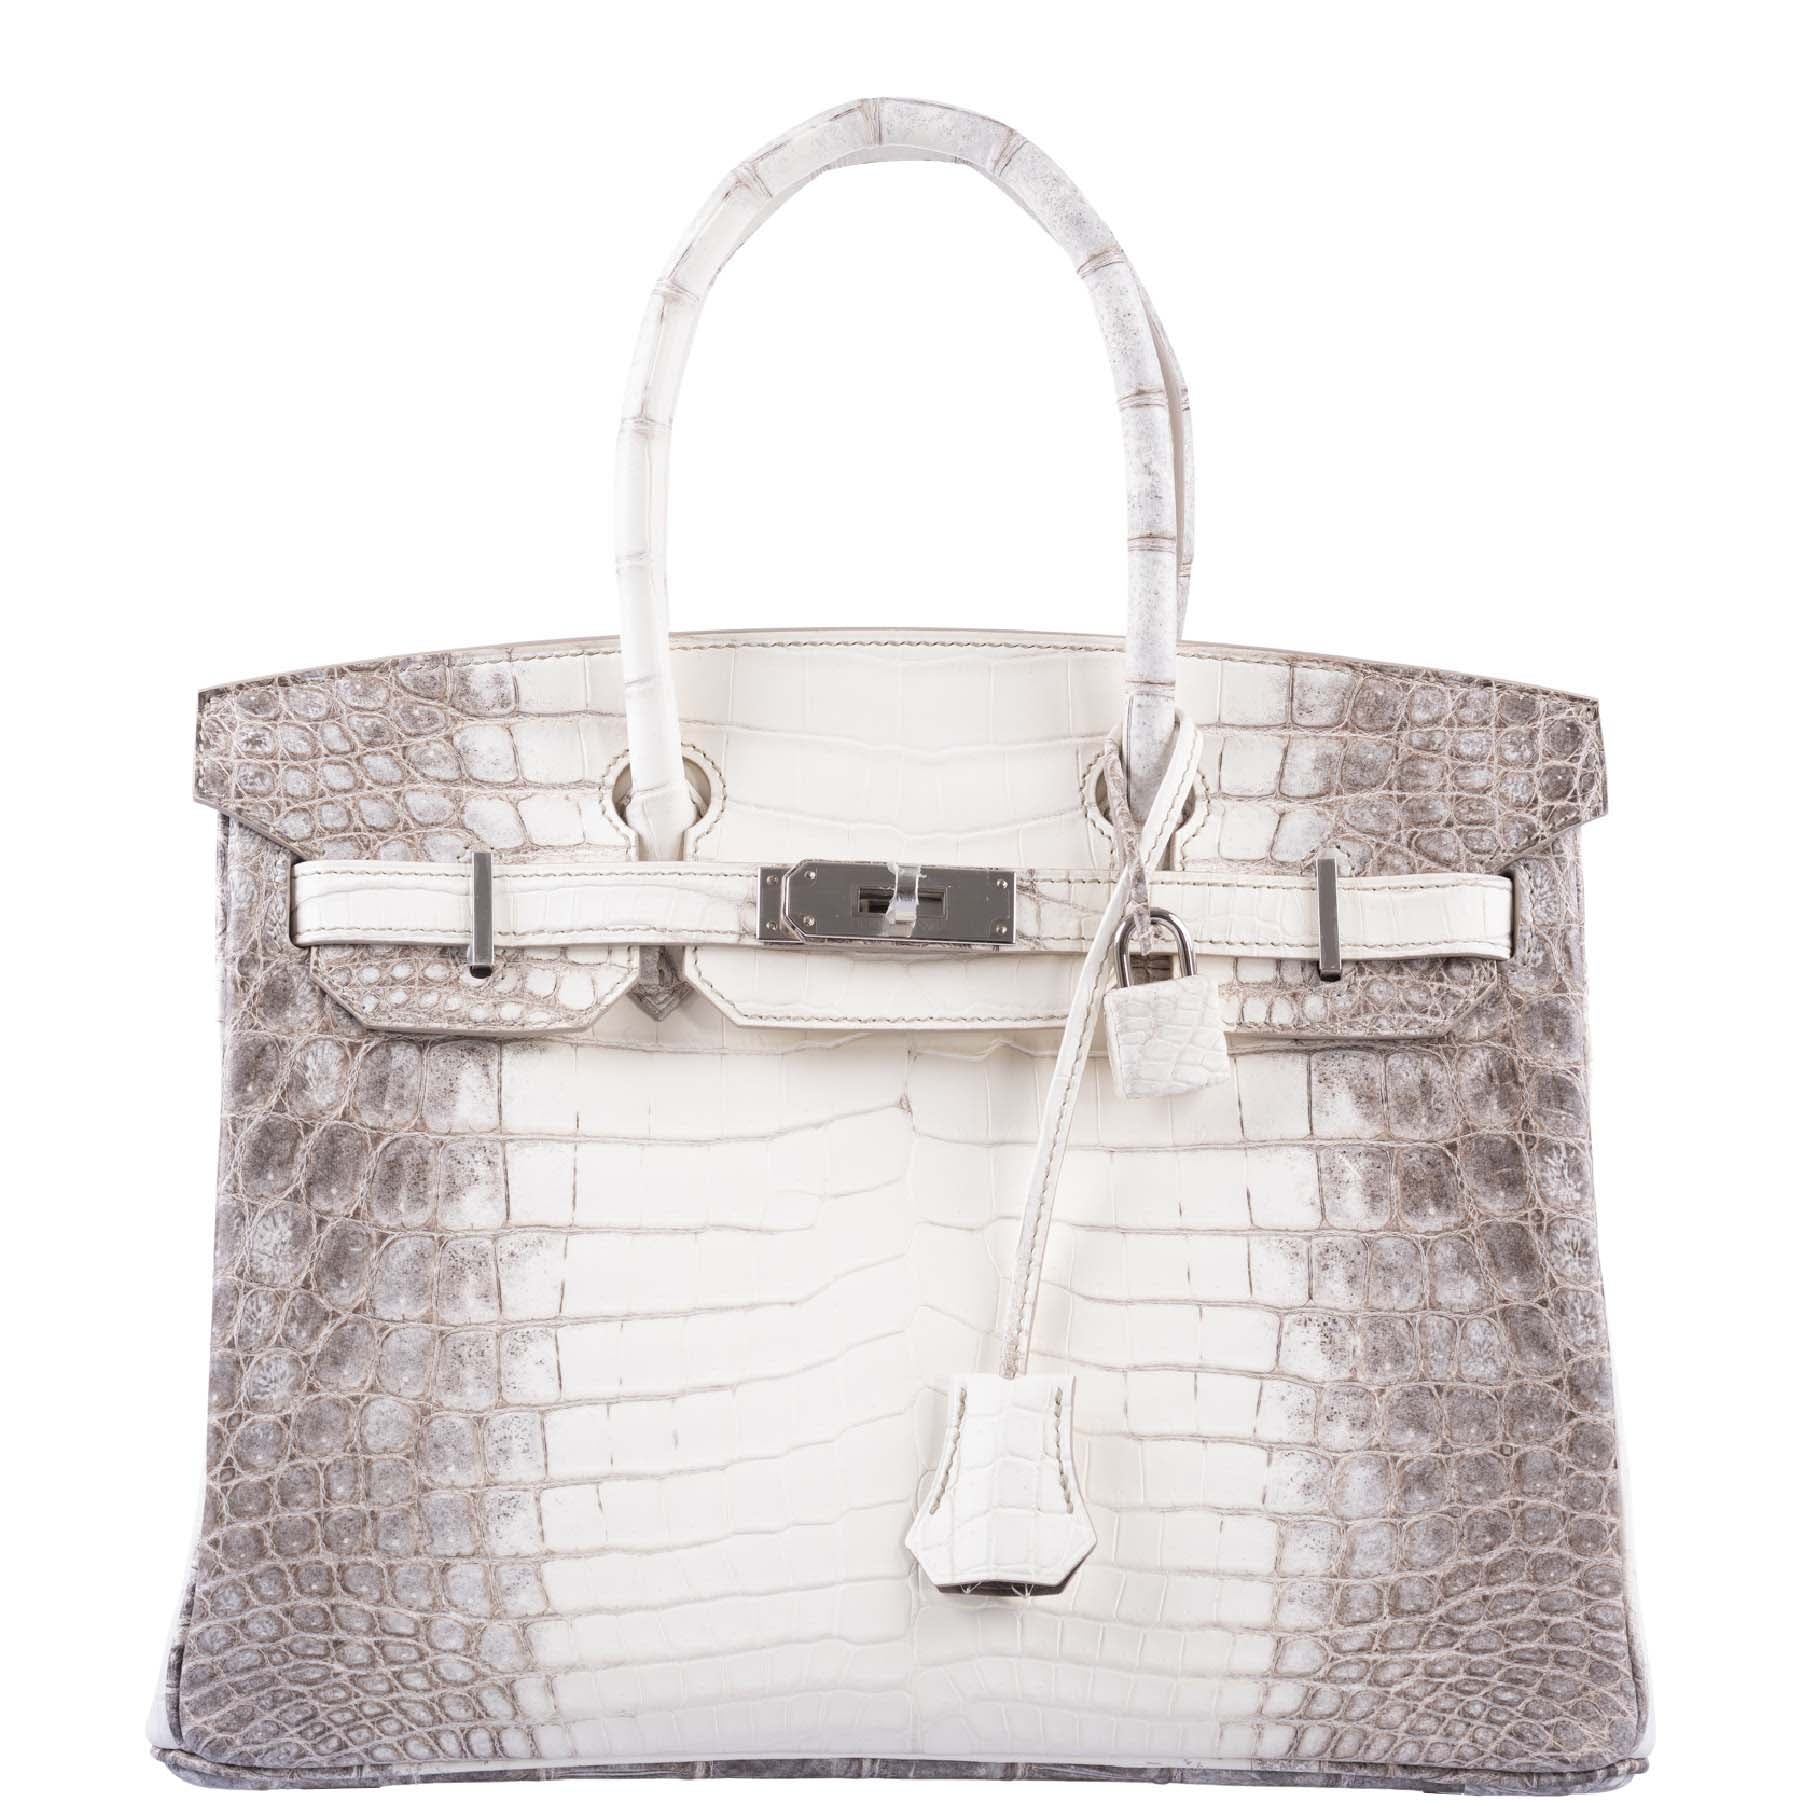 All about the Hermès Birkin bag collection